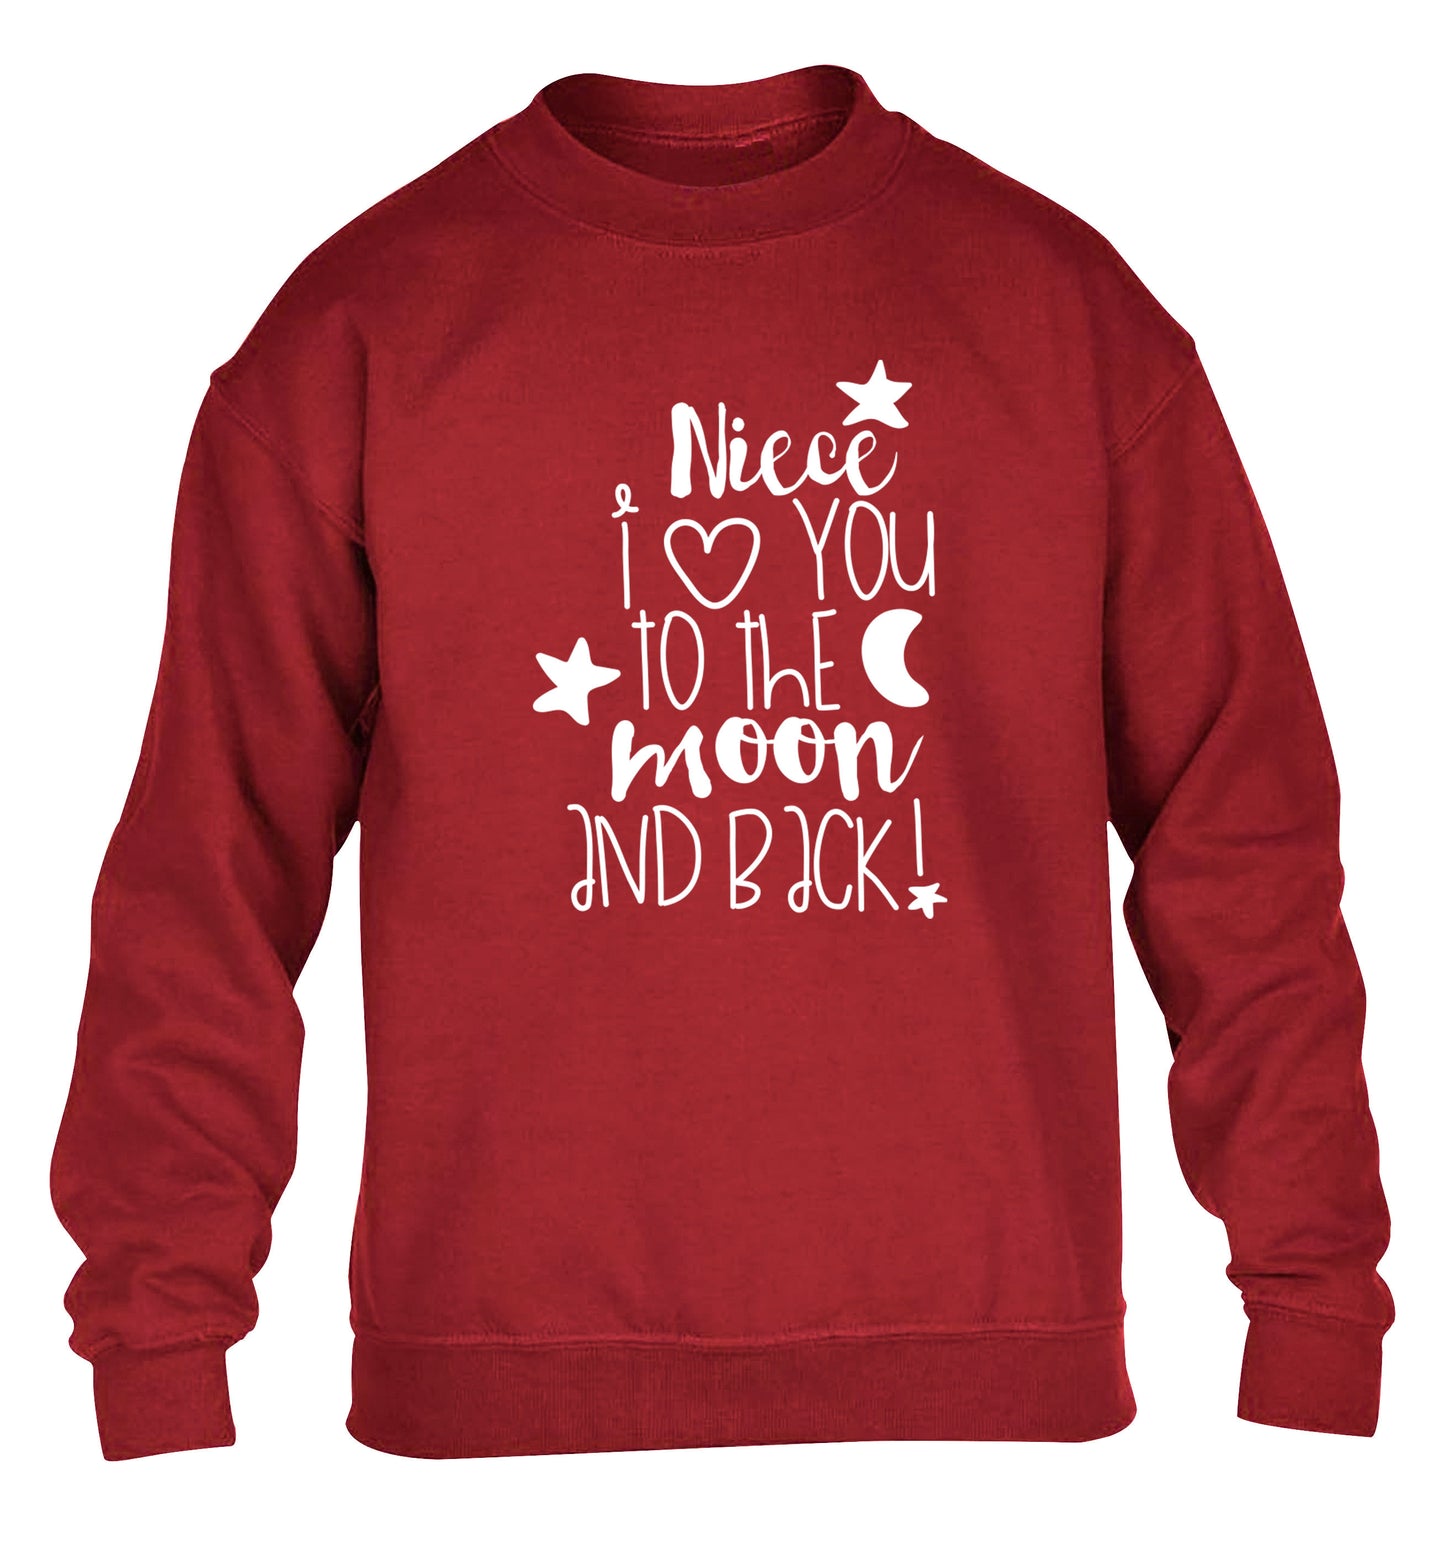 Niece I love you to the moon and back children's grey  sweater 12-14 Years